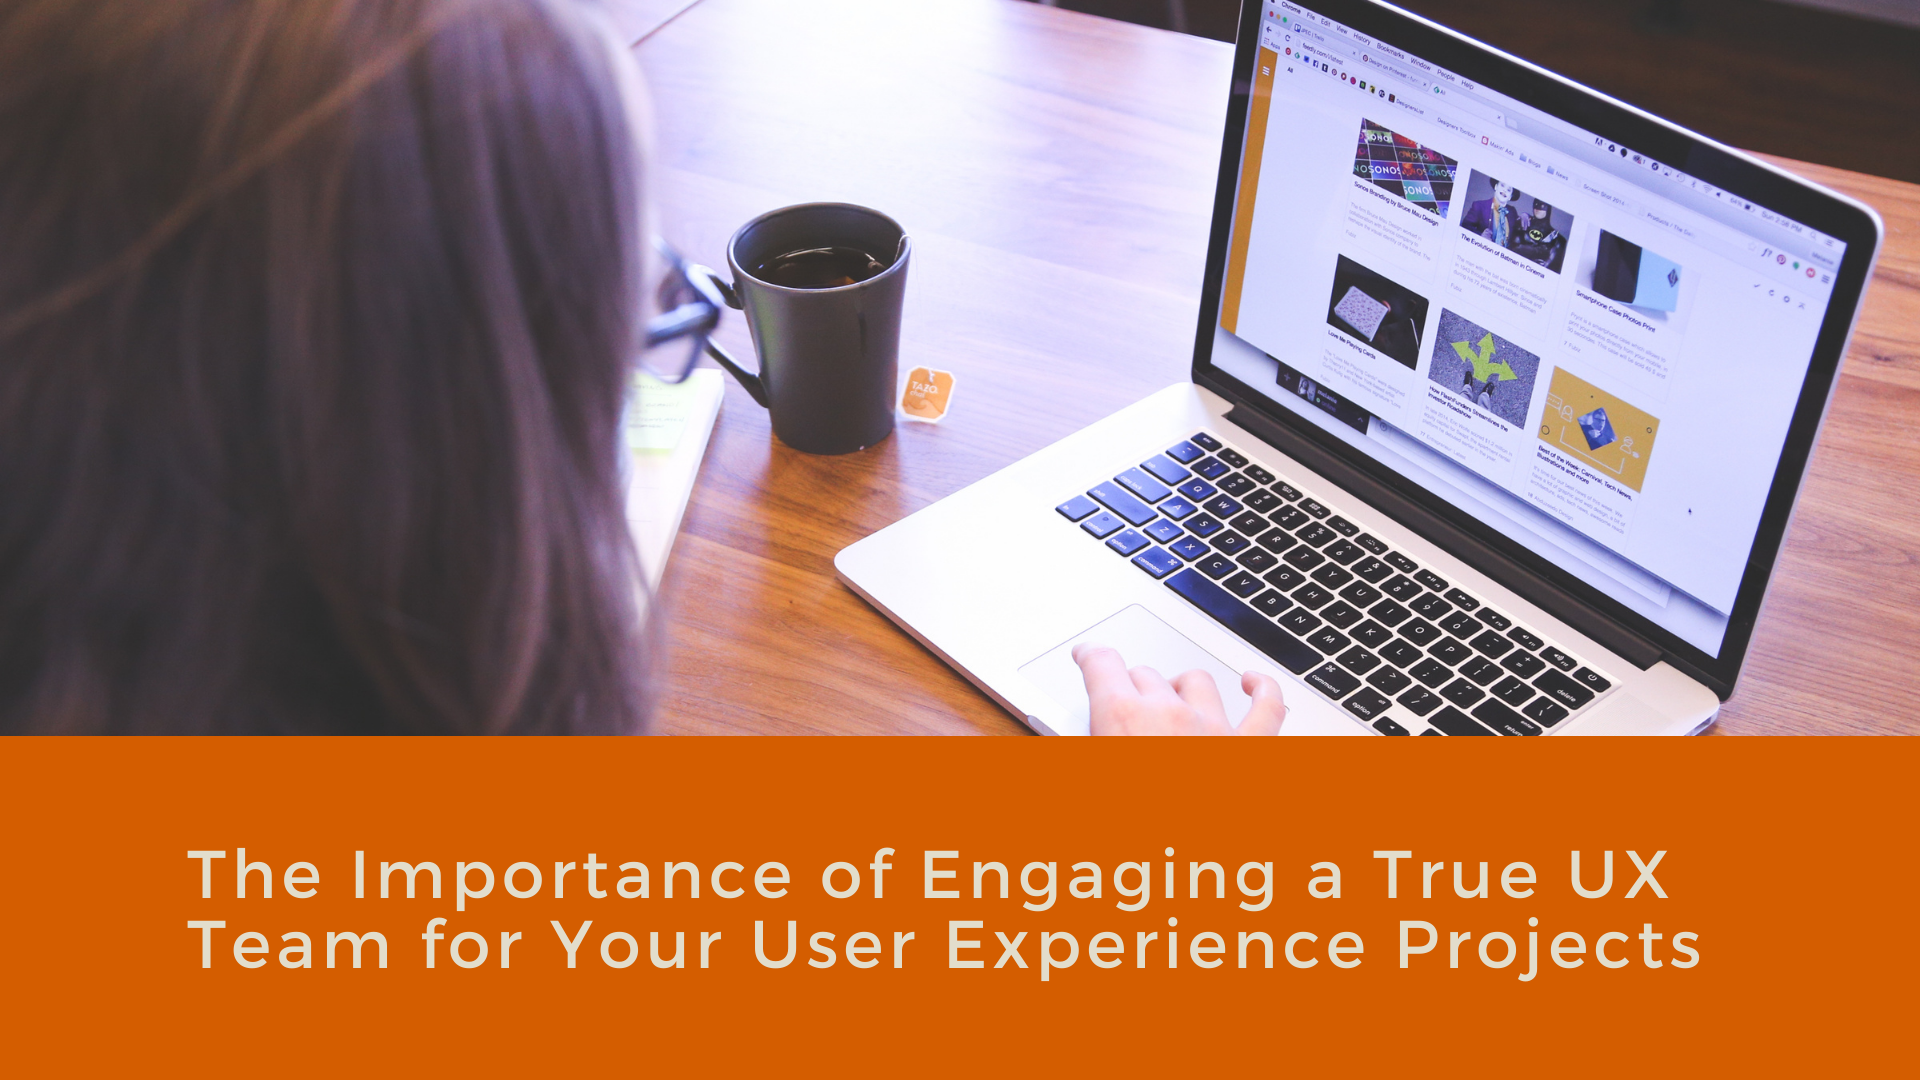 The Importance of Engaging a True UX Team for Your User Experience Projects